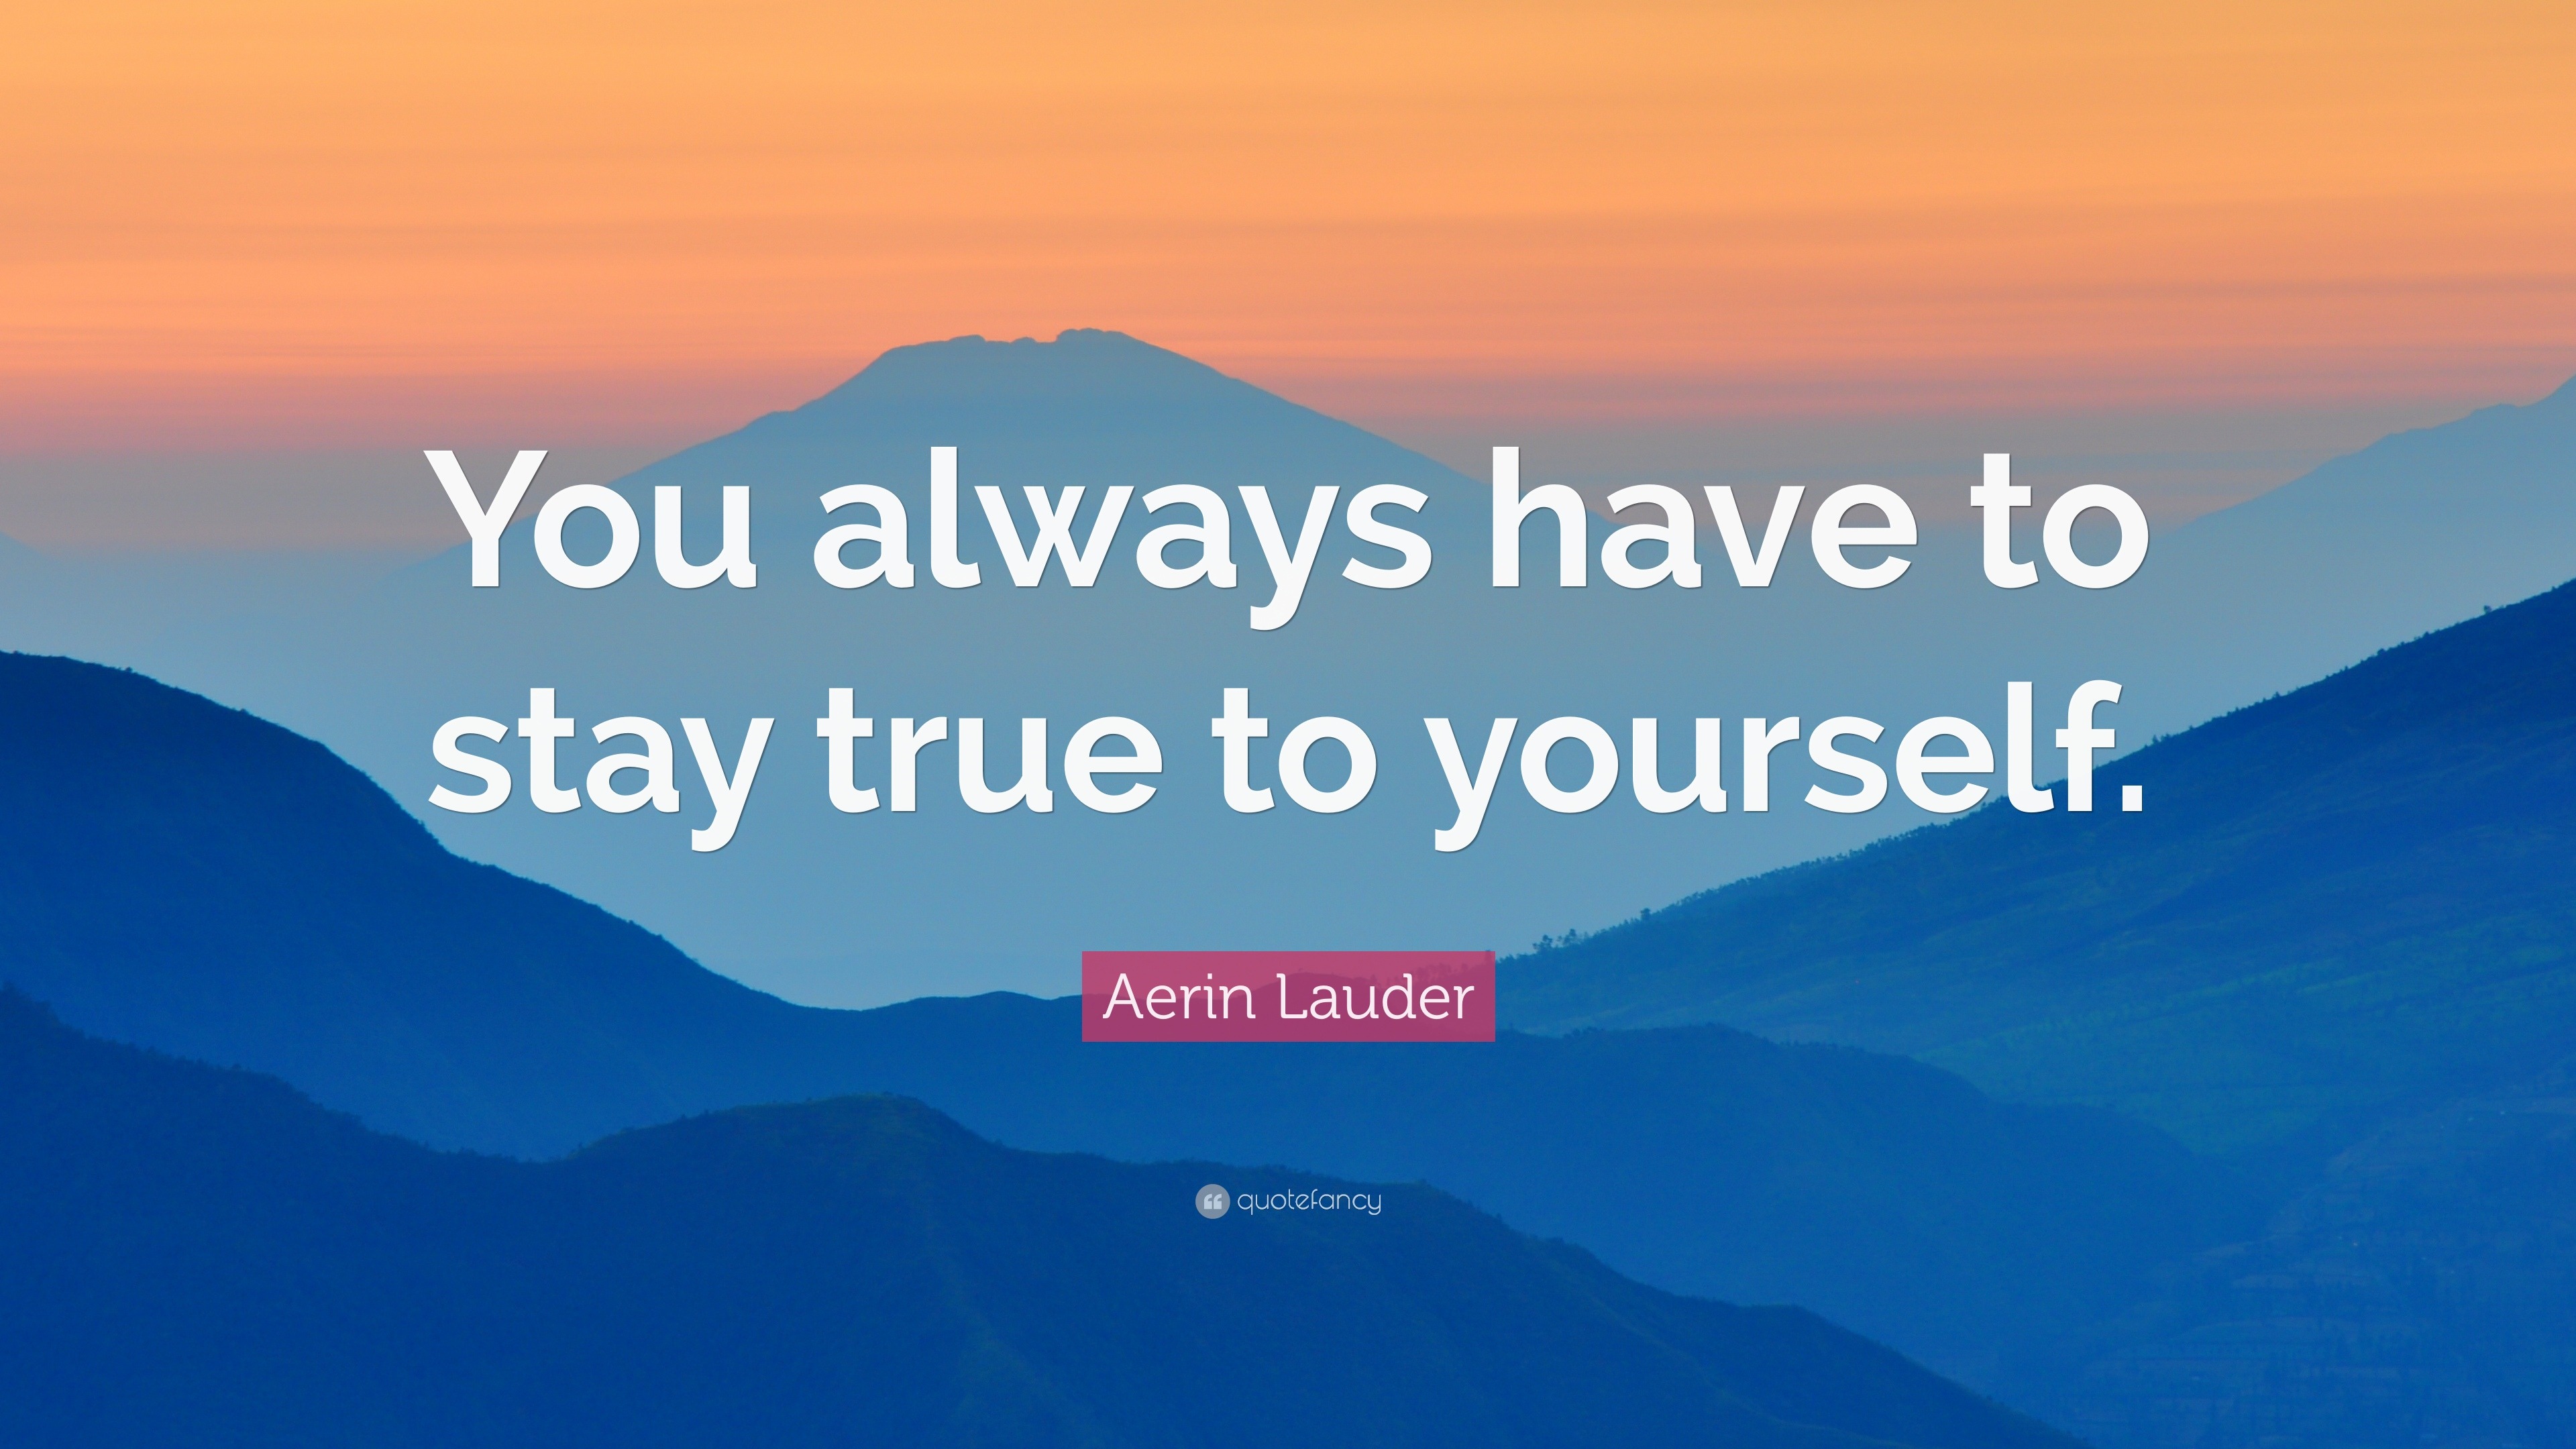 Aerin Lauder Quote: "You always have to stay true to yourself."